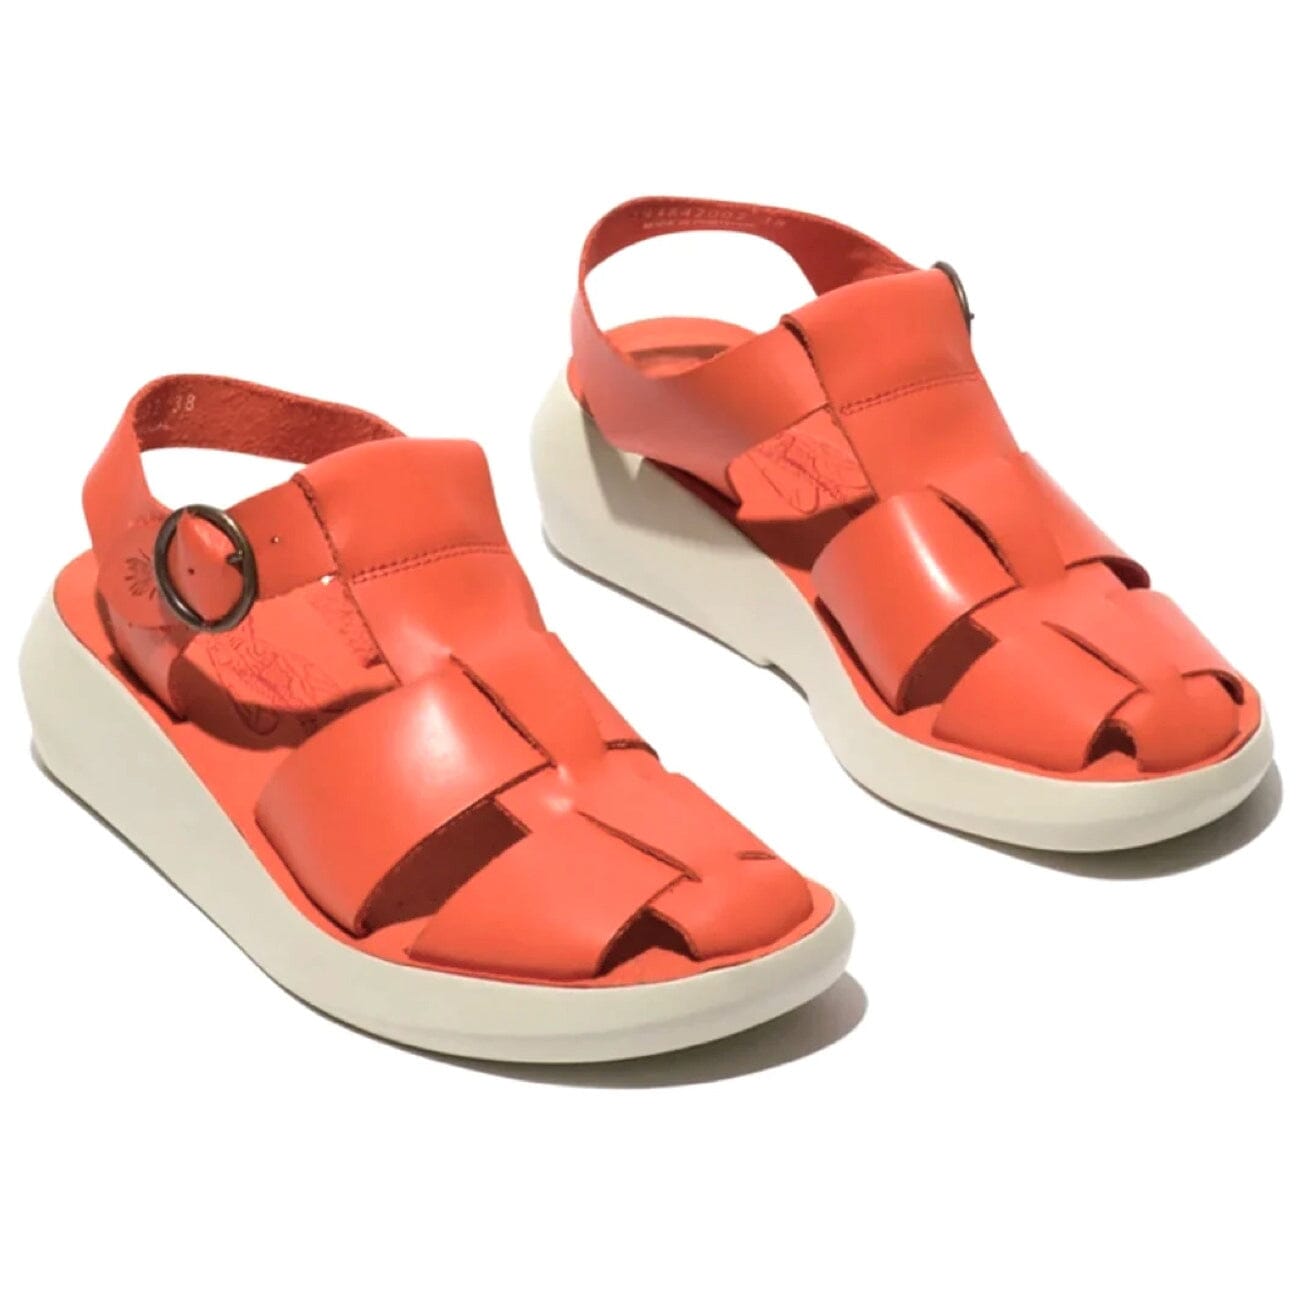 Fly London, BAWE842, Sandal, Leather, Coral Sandals Fly London Coral 36 